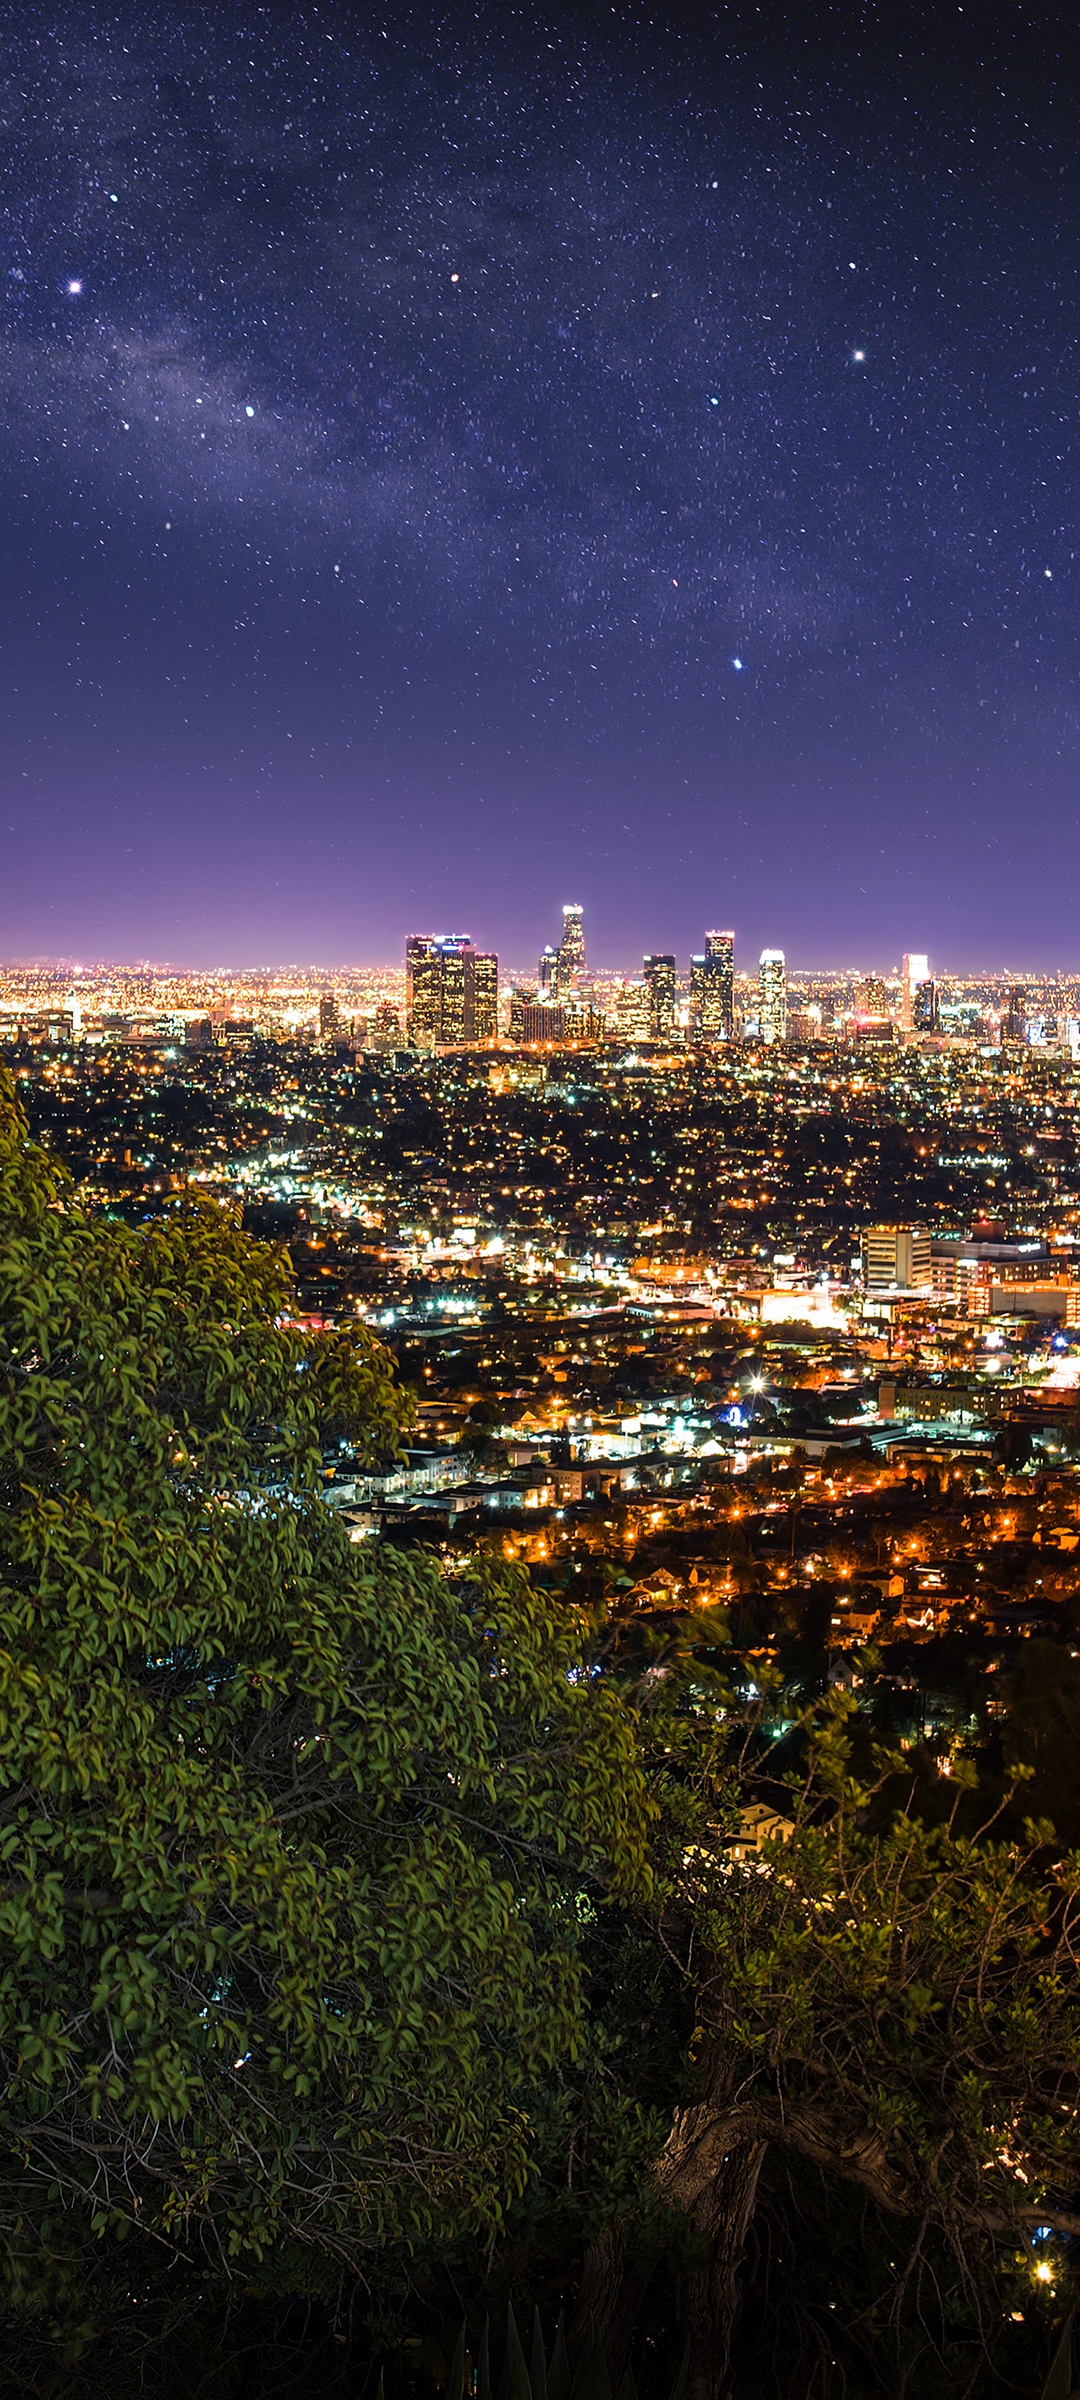 12500 Los Angeles At Night Stock Photos Pictures  RoyaltyFree Images   iStock  City of los angeles at night Downtown los angeles at night